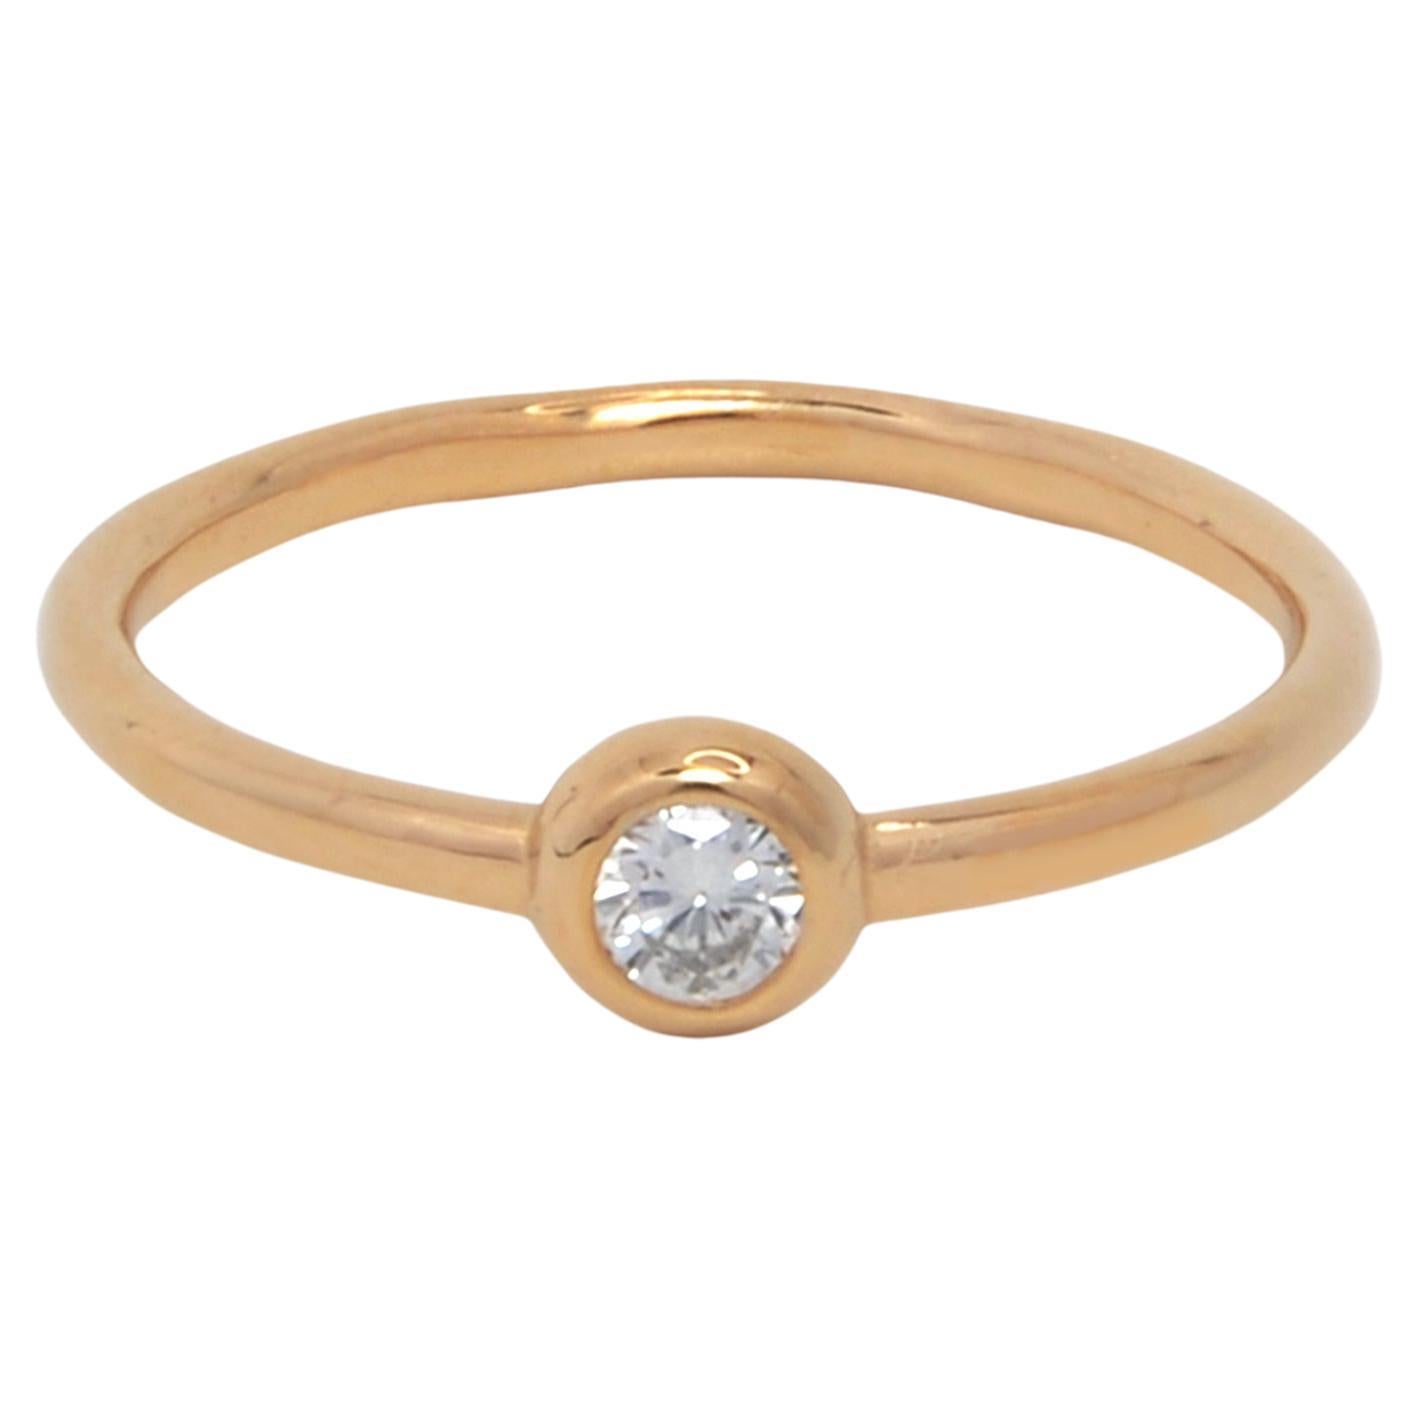 Ruth Nyc Ane Ring, Solitaire Diamond Ring in 14k Yellow Gold